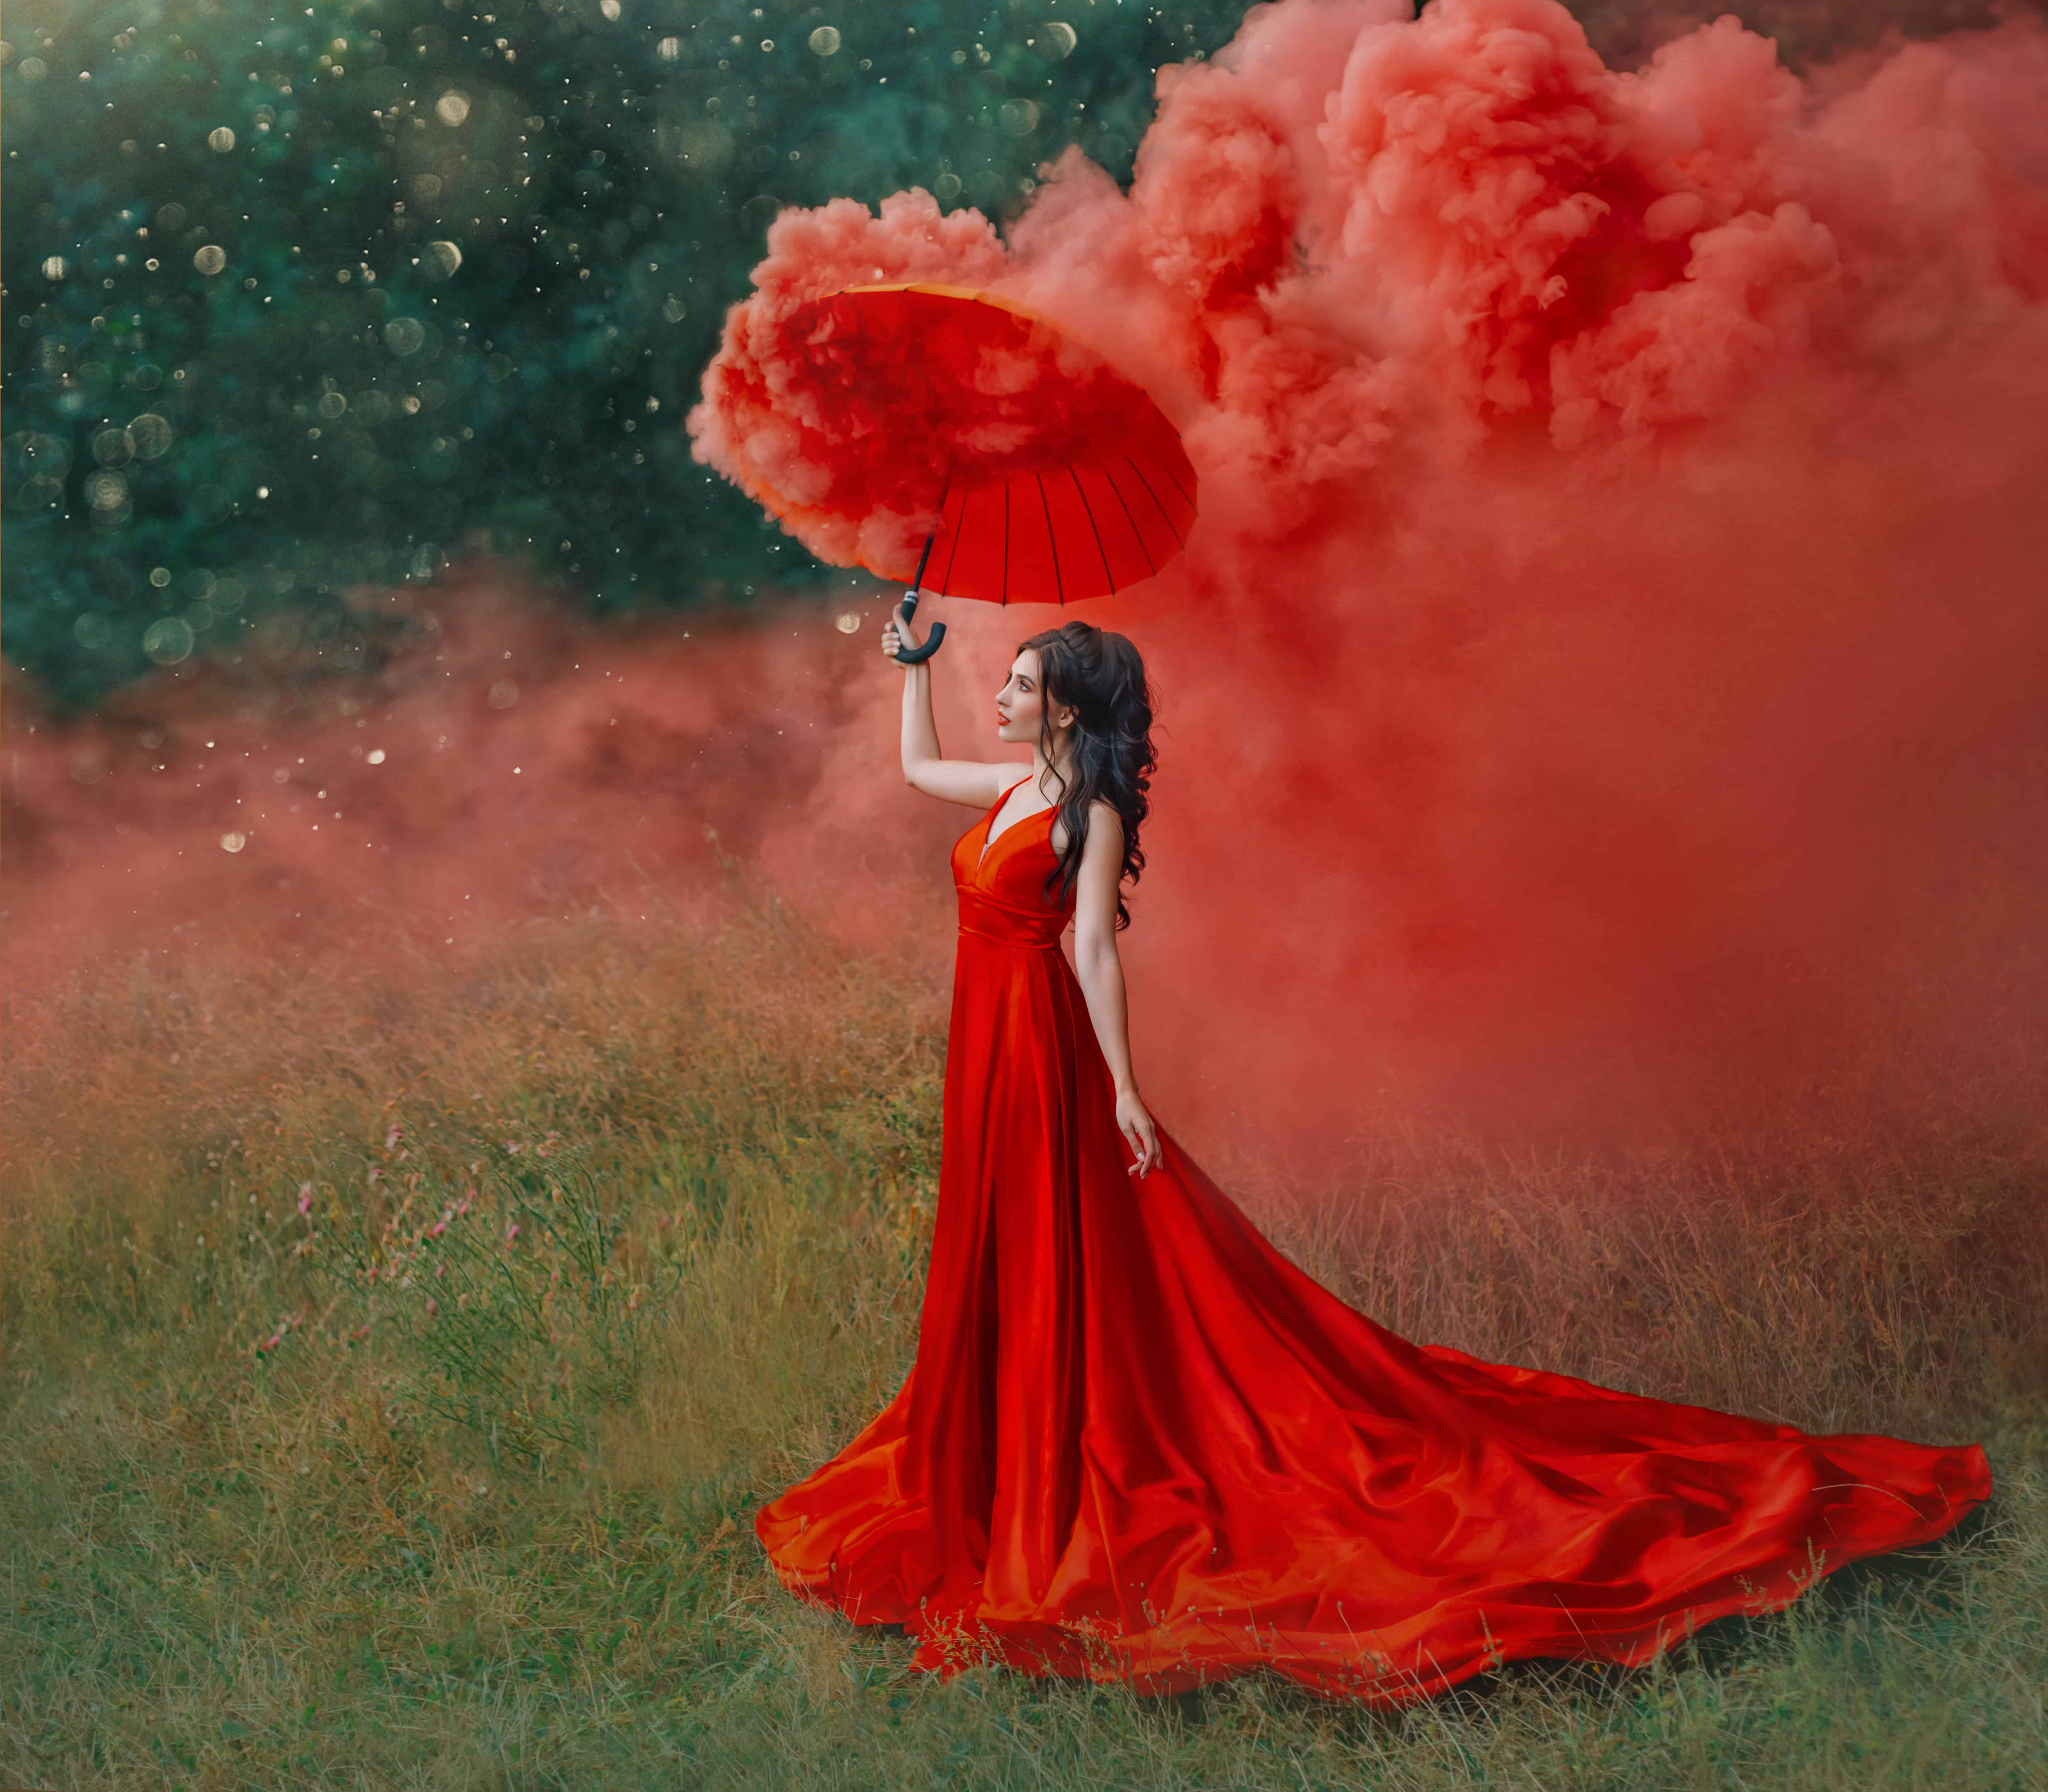 woman in red silk long dress train with umbrella. Art design photography. Idea Creative photo shoot with colored smoke bomb. Magical light nature. Glamorous fashion lady walks in woods. valentines day